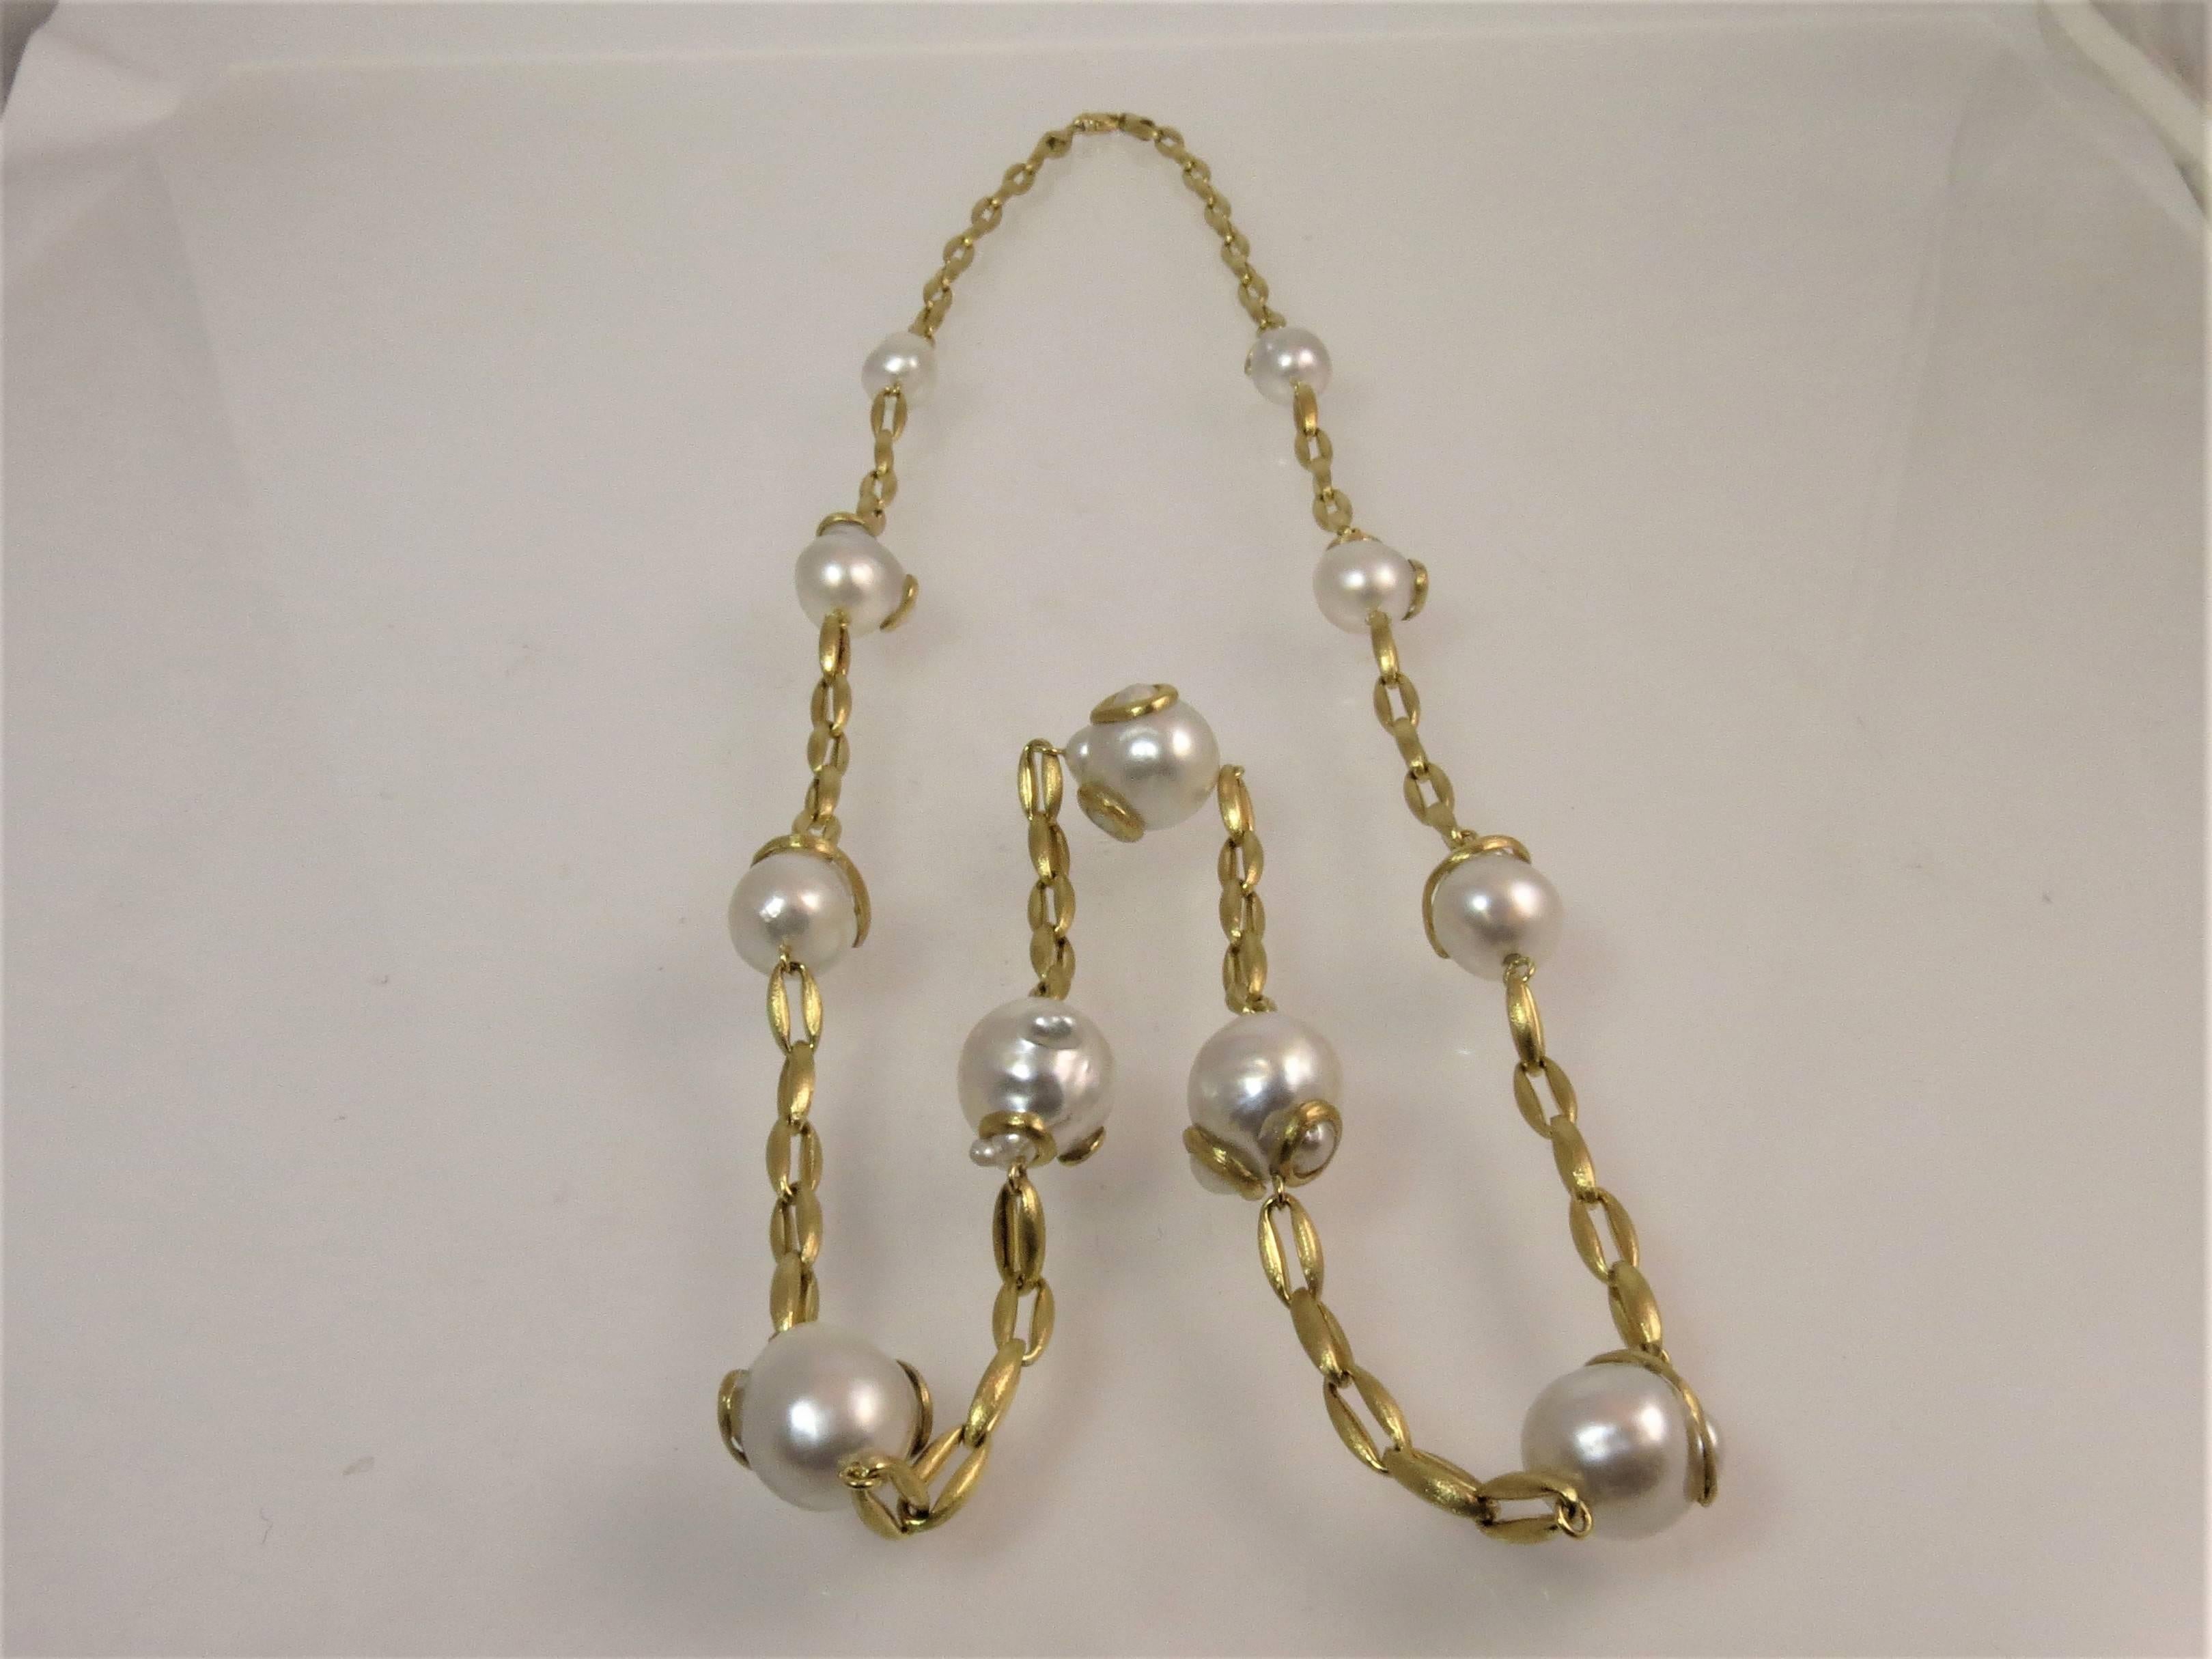 YVEL 18K brushed yellow gold 36 inch link necklace, with 11 Baroque South Sea pearls. Pearls measure 20mmx13mm. 